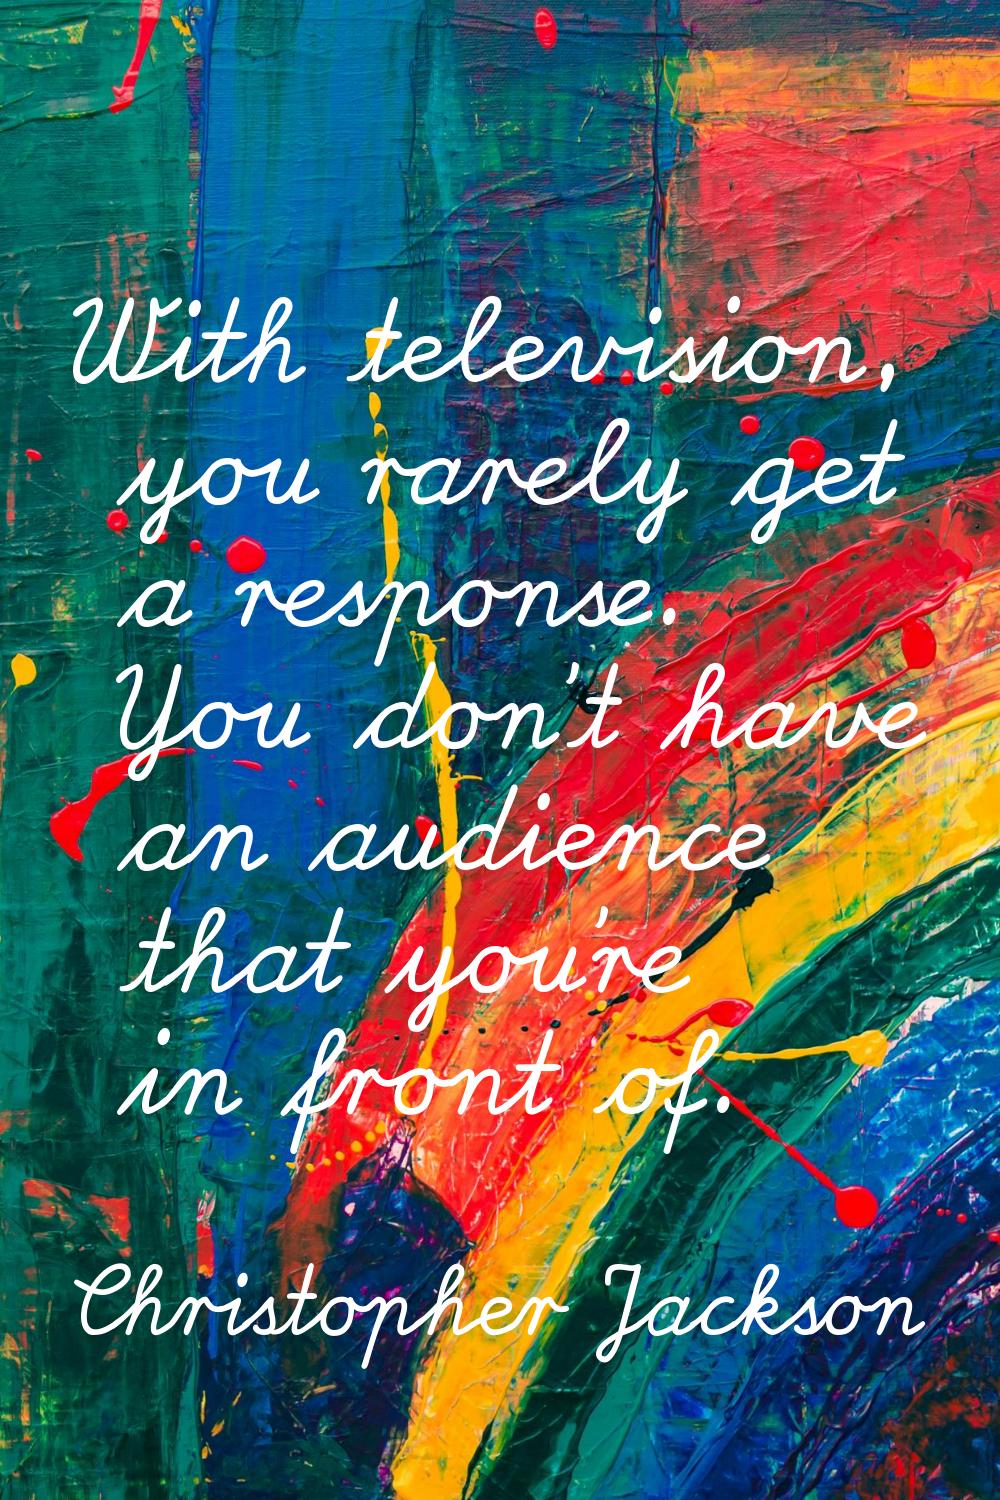 With television, you rarely get a response. You don't have an audience that you're in front of.